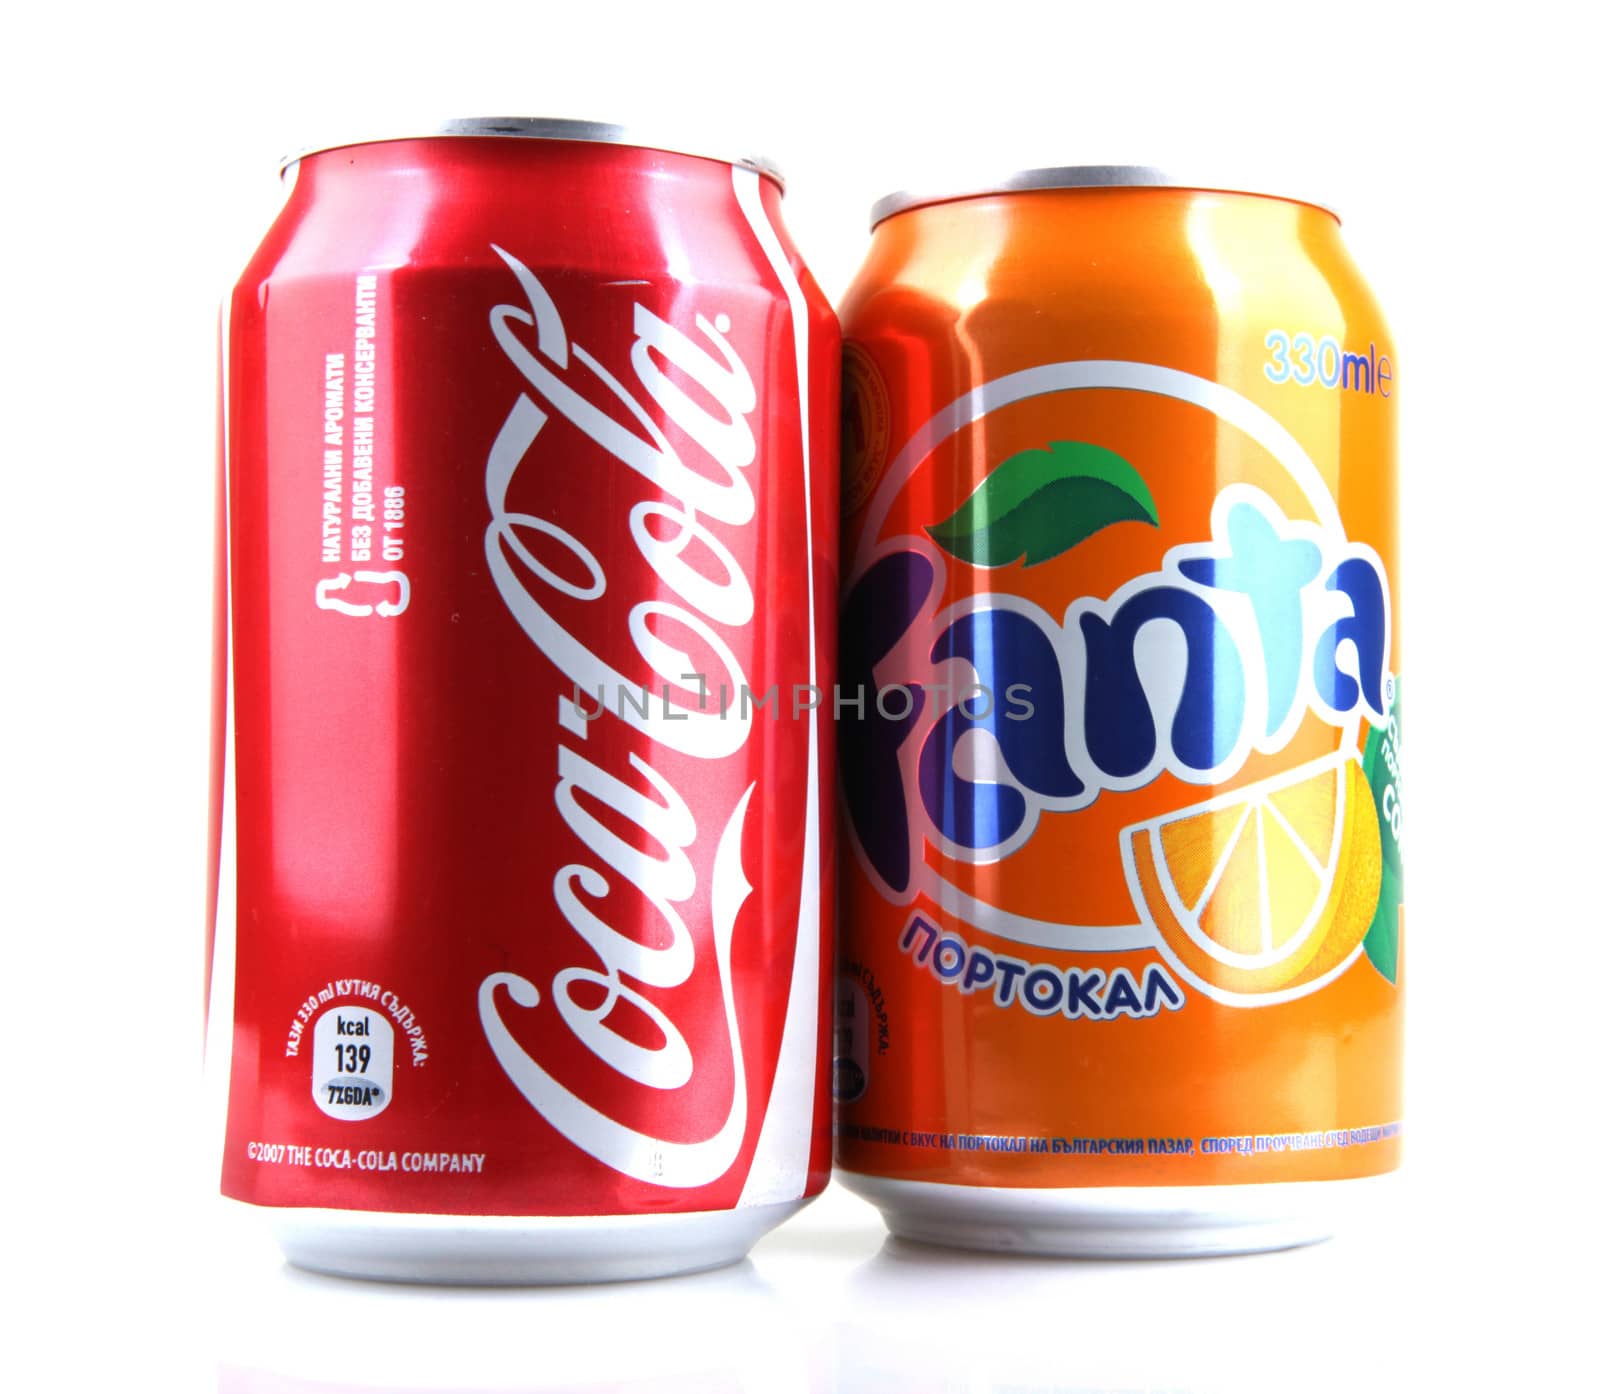 AYTOS, BULGARIA - JANUARY 23, 2014: Global brand of fruit-flavored carbonated soft drinks created by The Coca-Cola Company.